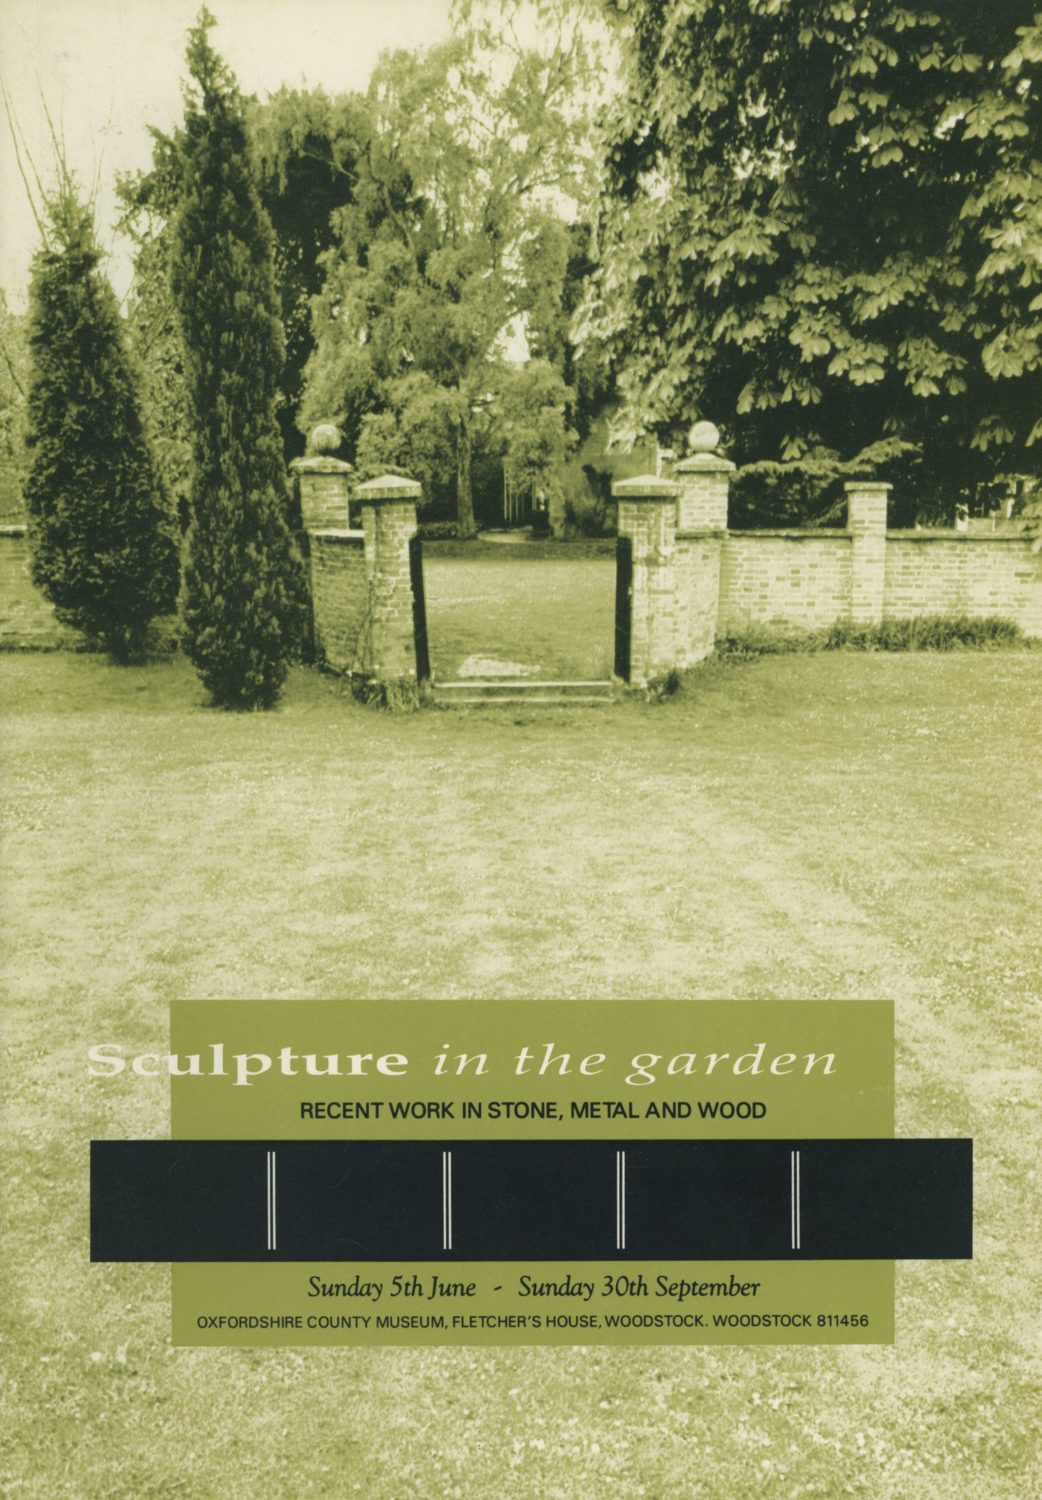 ‘Sculpture in the Garden’, Oxfordshire County Museum, Oxford, UK (1983)